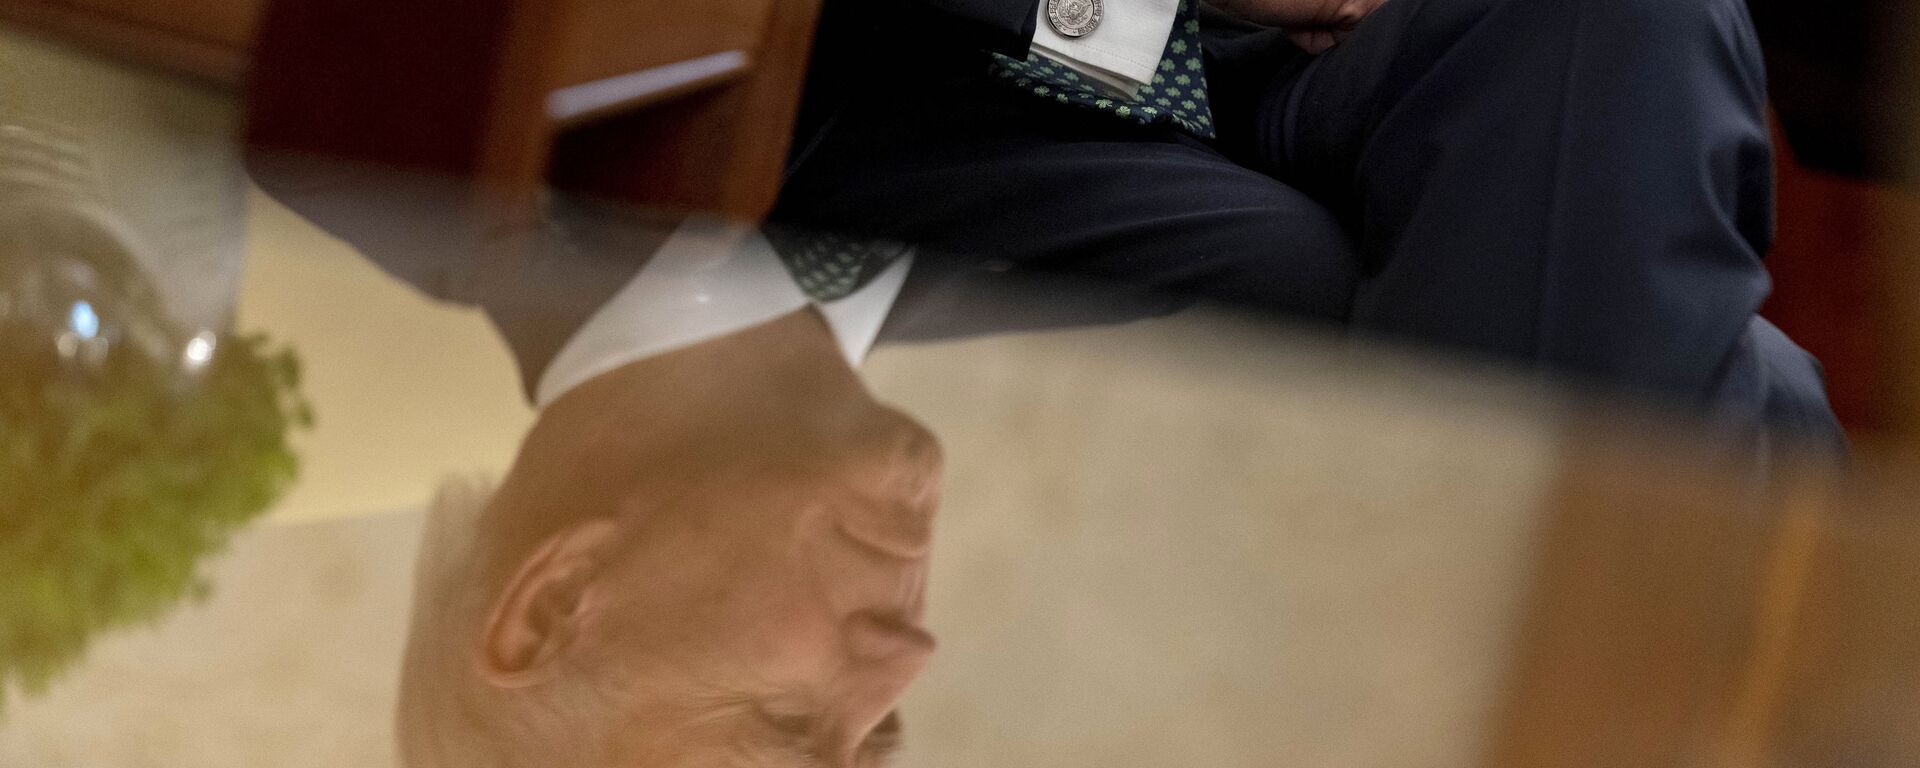 President Joe Biden, seen in reflection, sits next to a bowl of Irish shamrocks, left, as he has a virtual meeting with Ireland's Prime Minister Micheal Martin on St. Patrick's Day, in the Oval Office of the White House, Wednesday, March 17, 2021, in Washington.  - Sputnik International, 1920, 15.08.2022